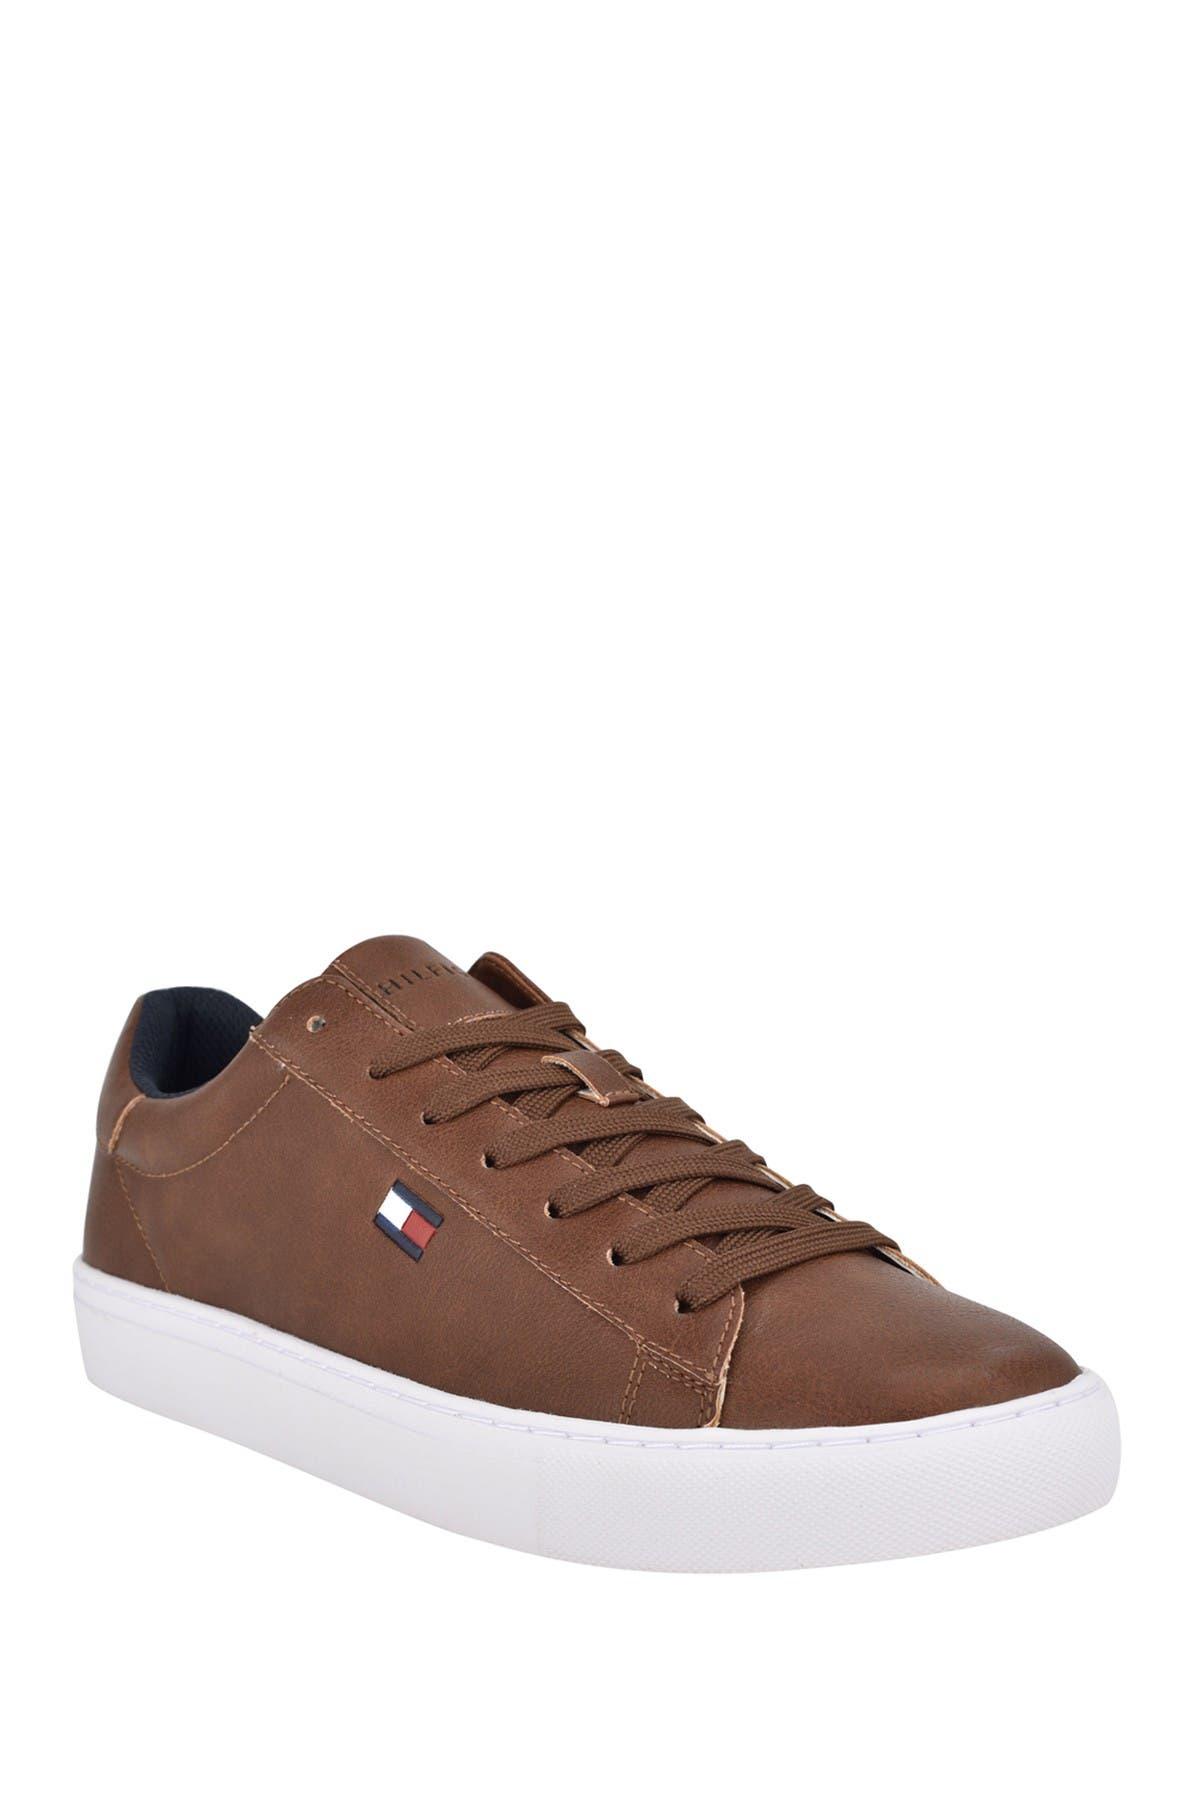 Tommy Hilfiger Brecon Signature Sneaker In Brmll At Nordstrom Rack 